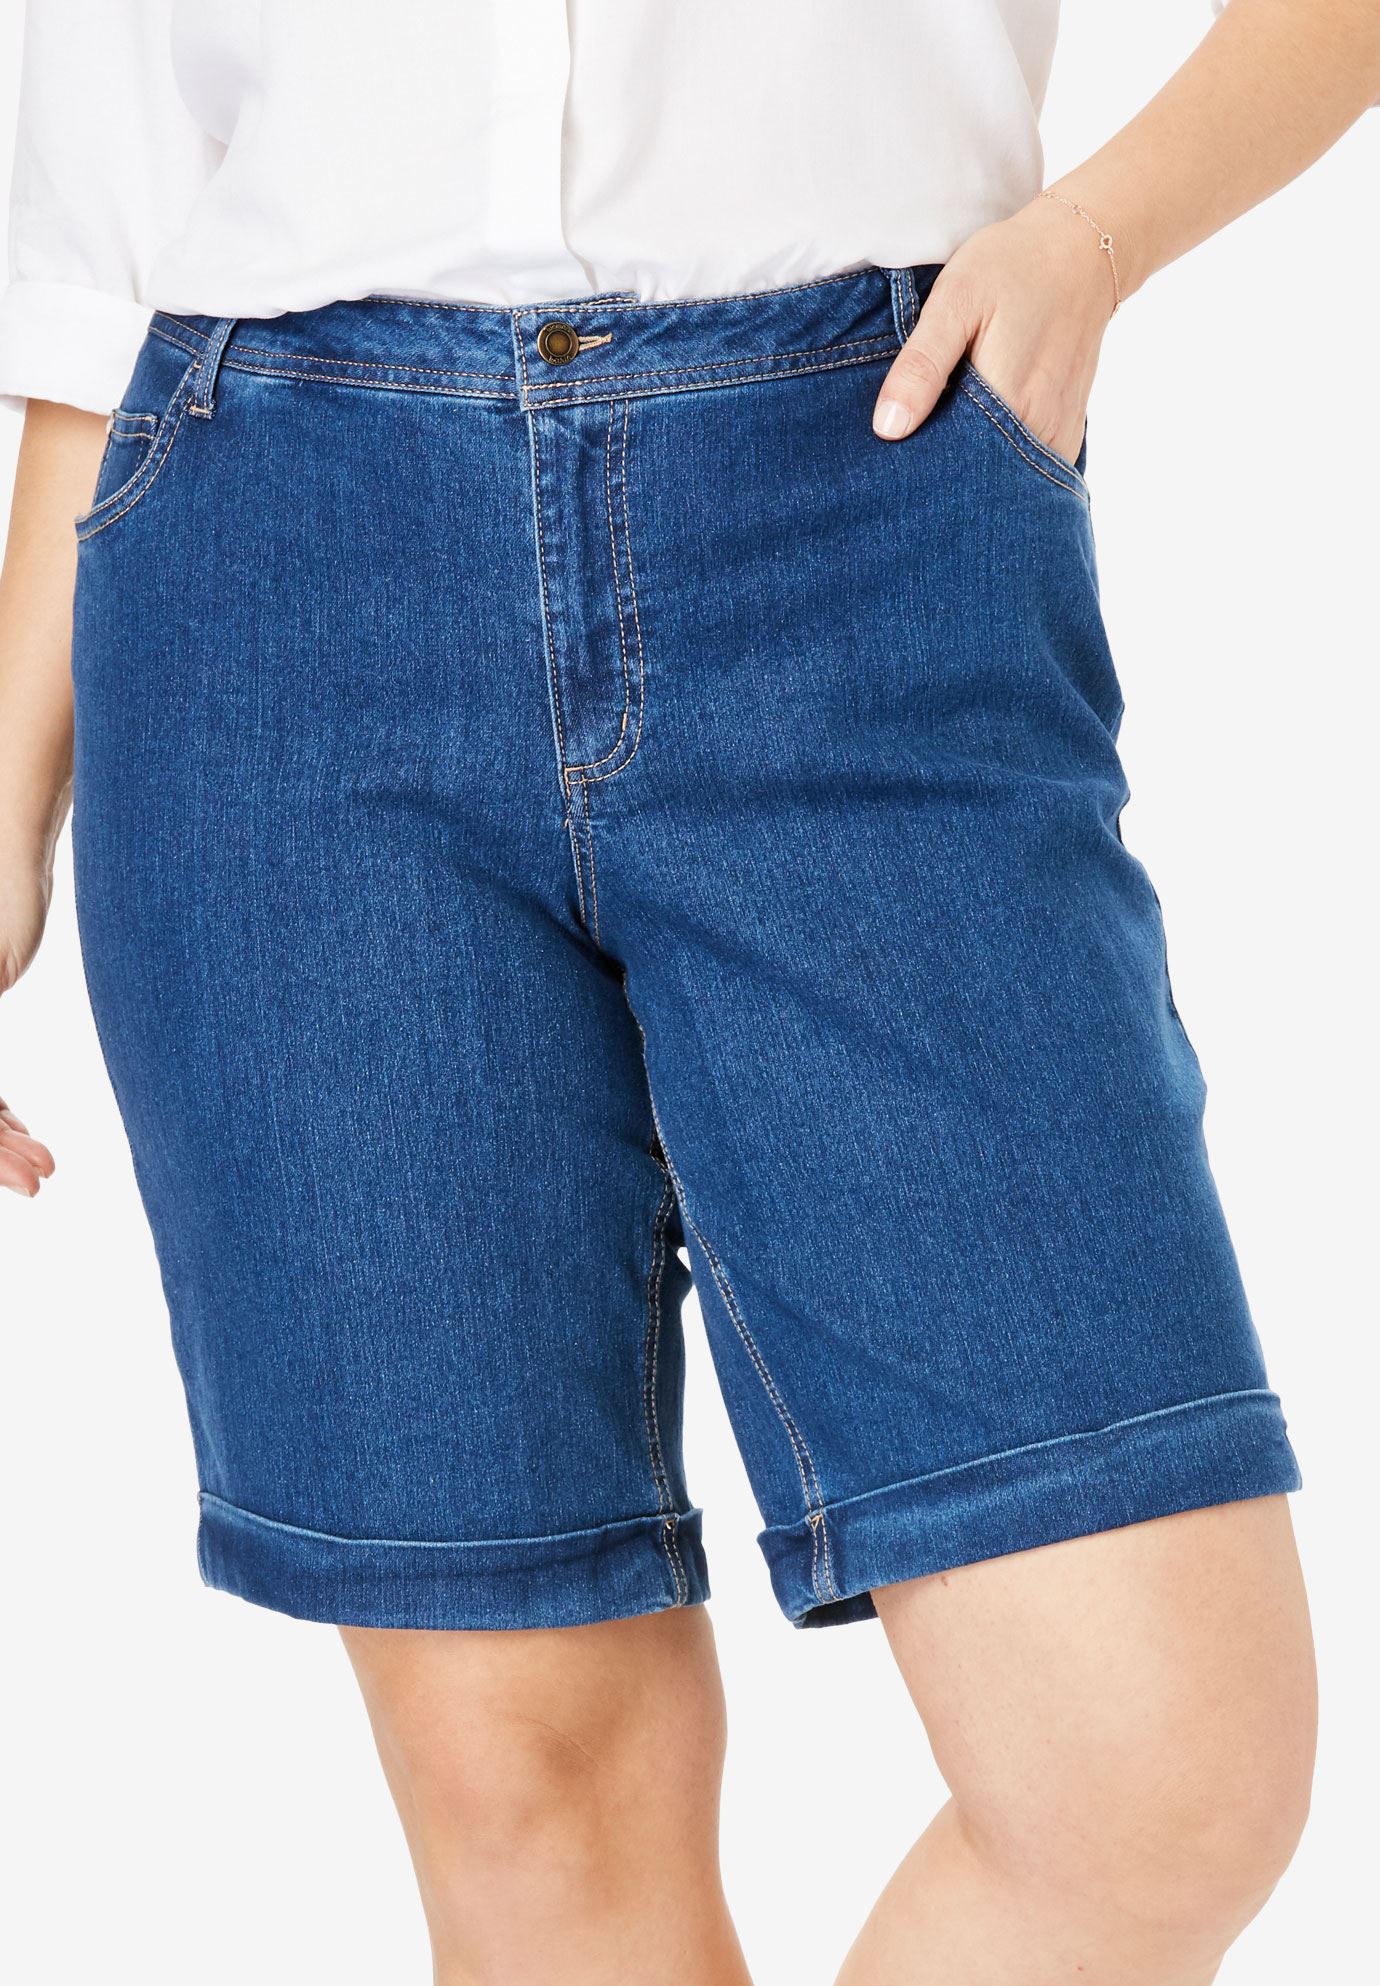 Stretch Jean Bermuda Short | Plus Size Shorts | Woman Within